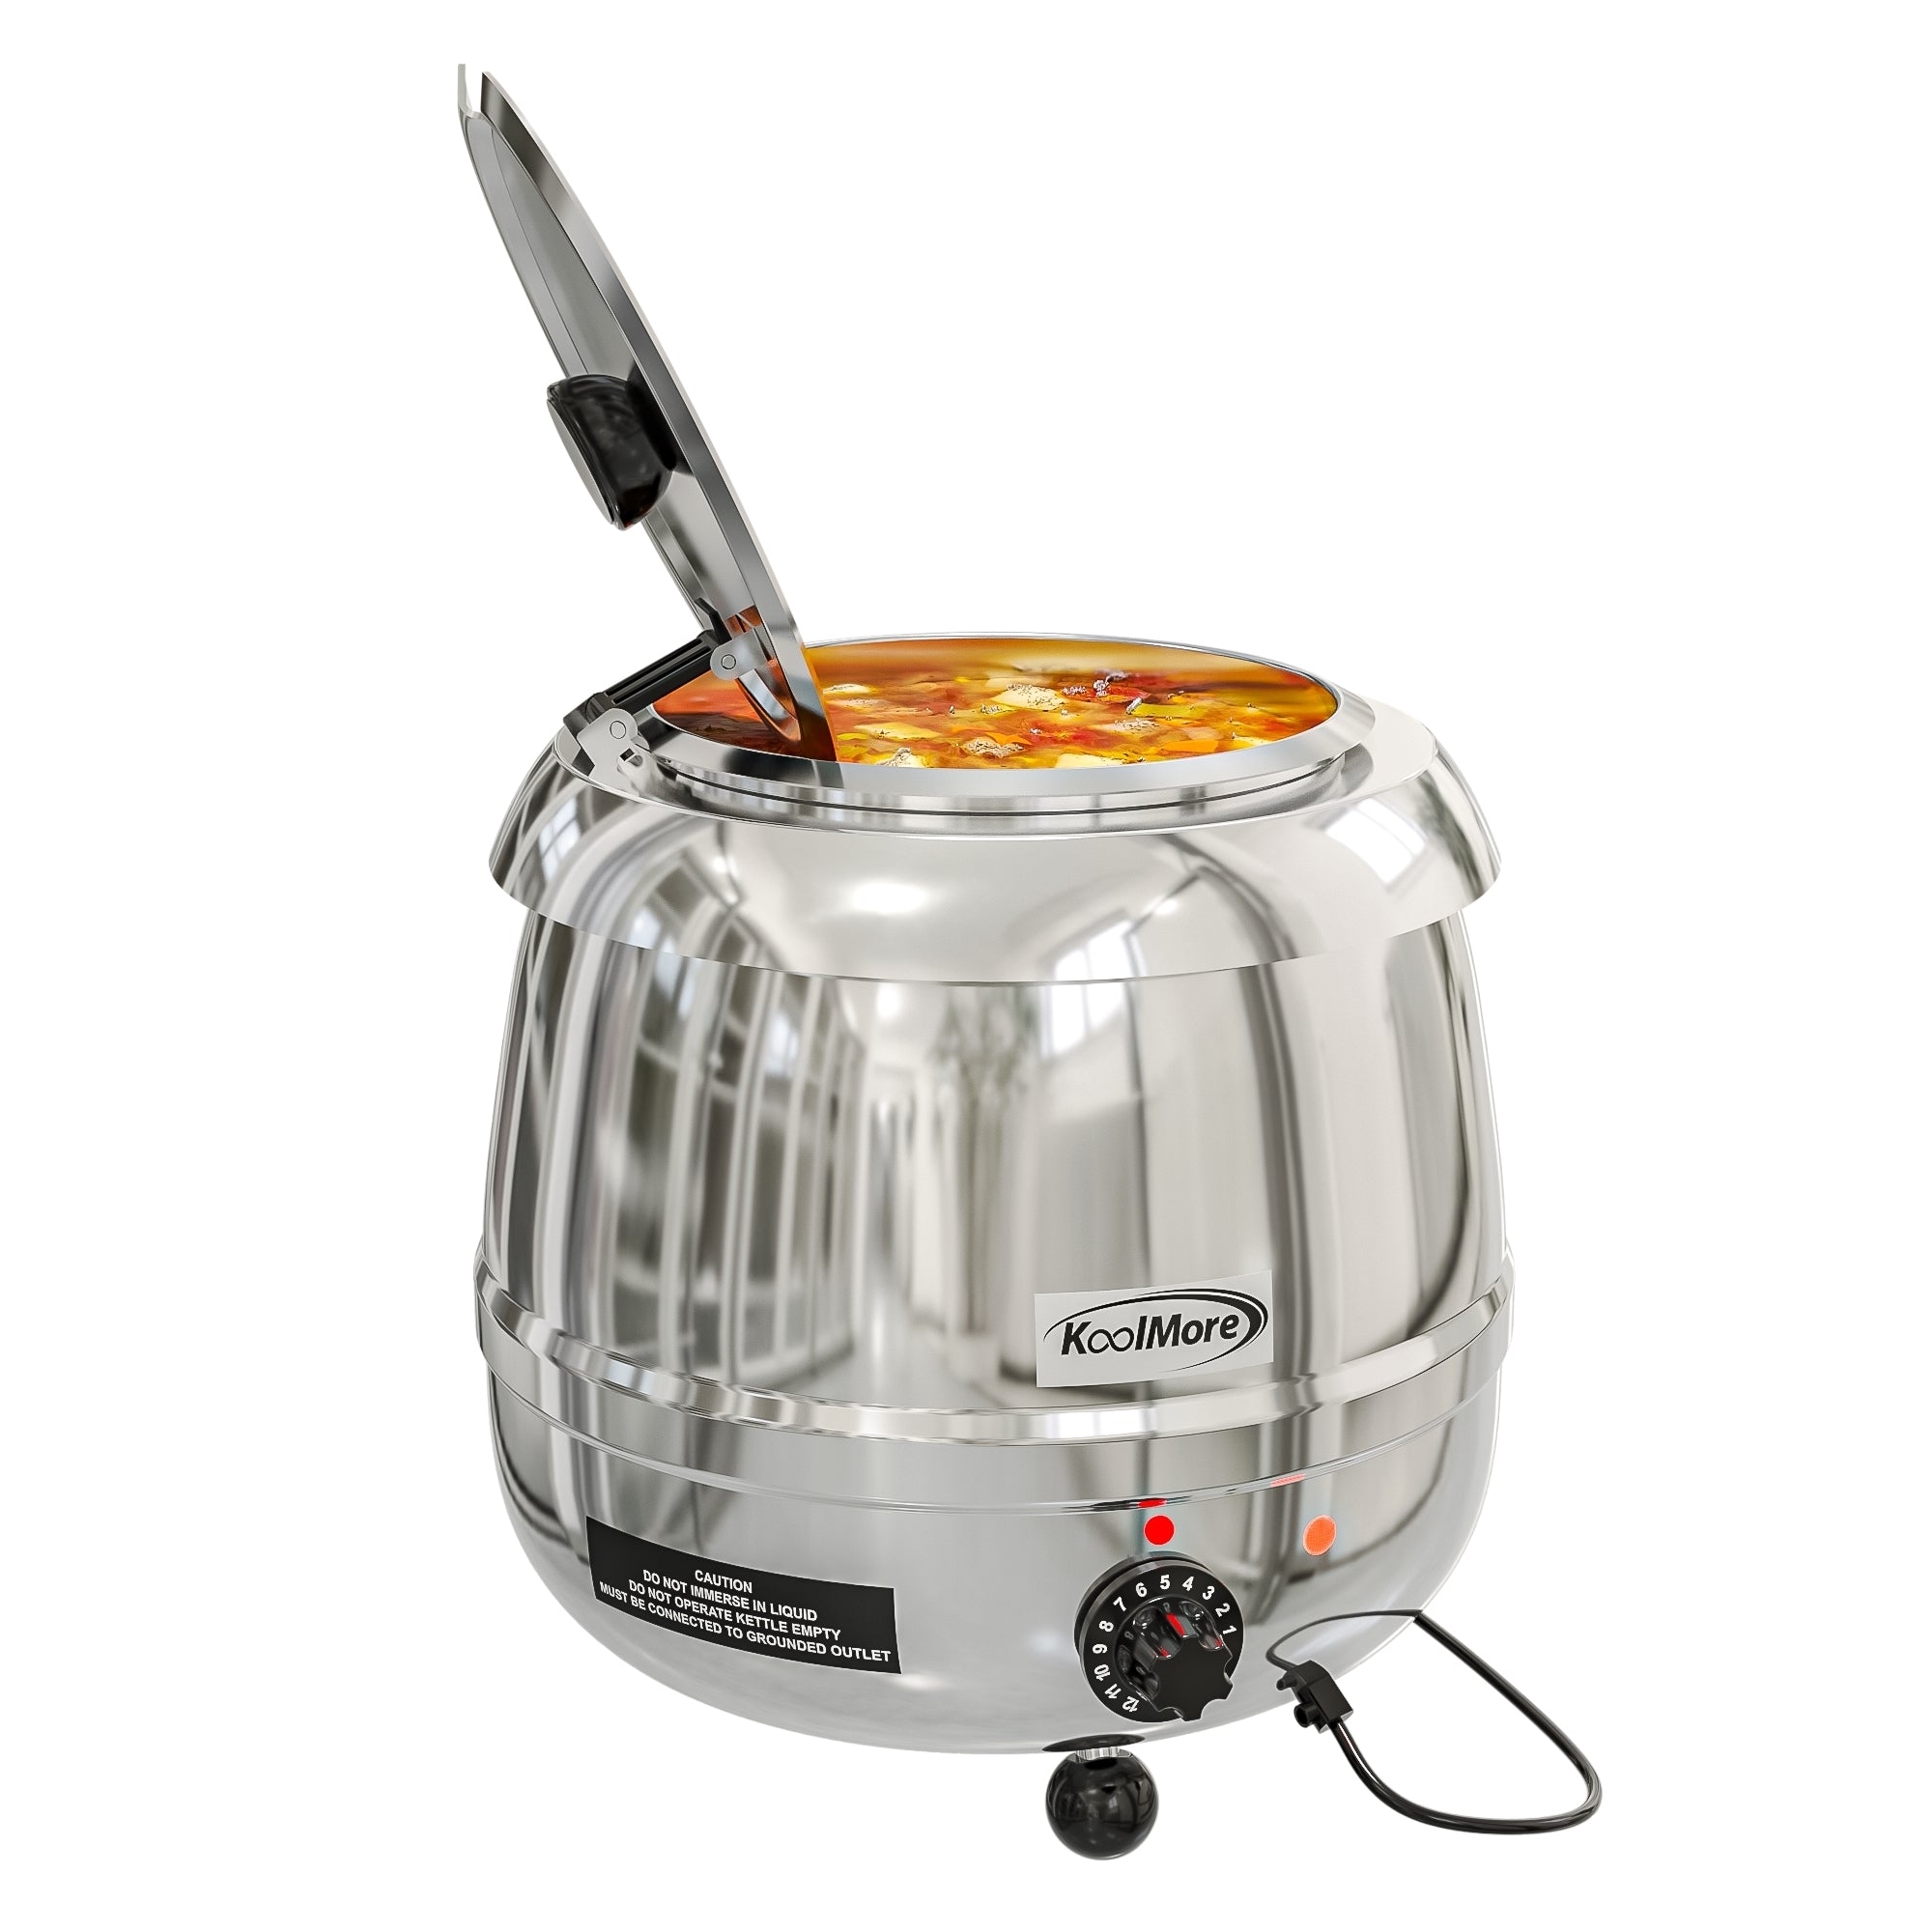 MIDUO 10 Quart Electric Countertop Soup Kettle Food Warmer and Insulation  with stainless steel cover